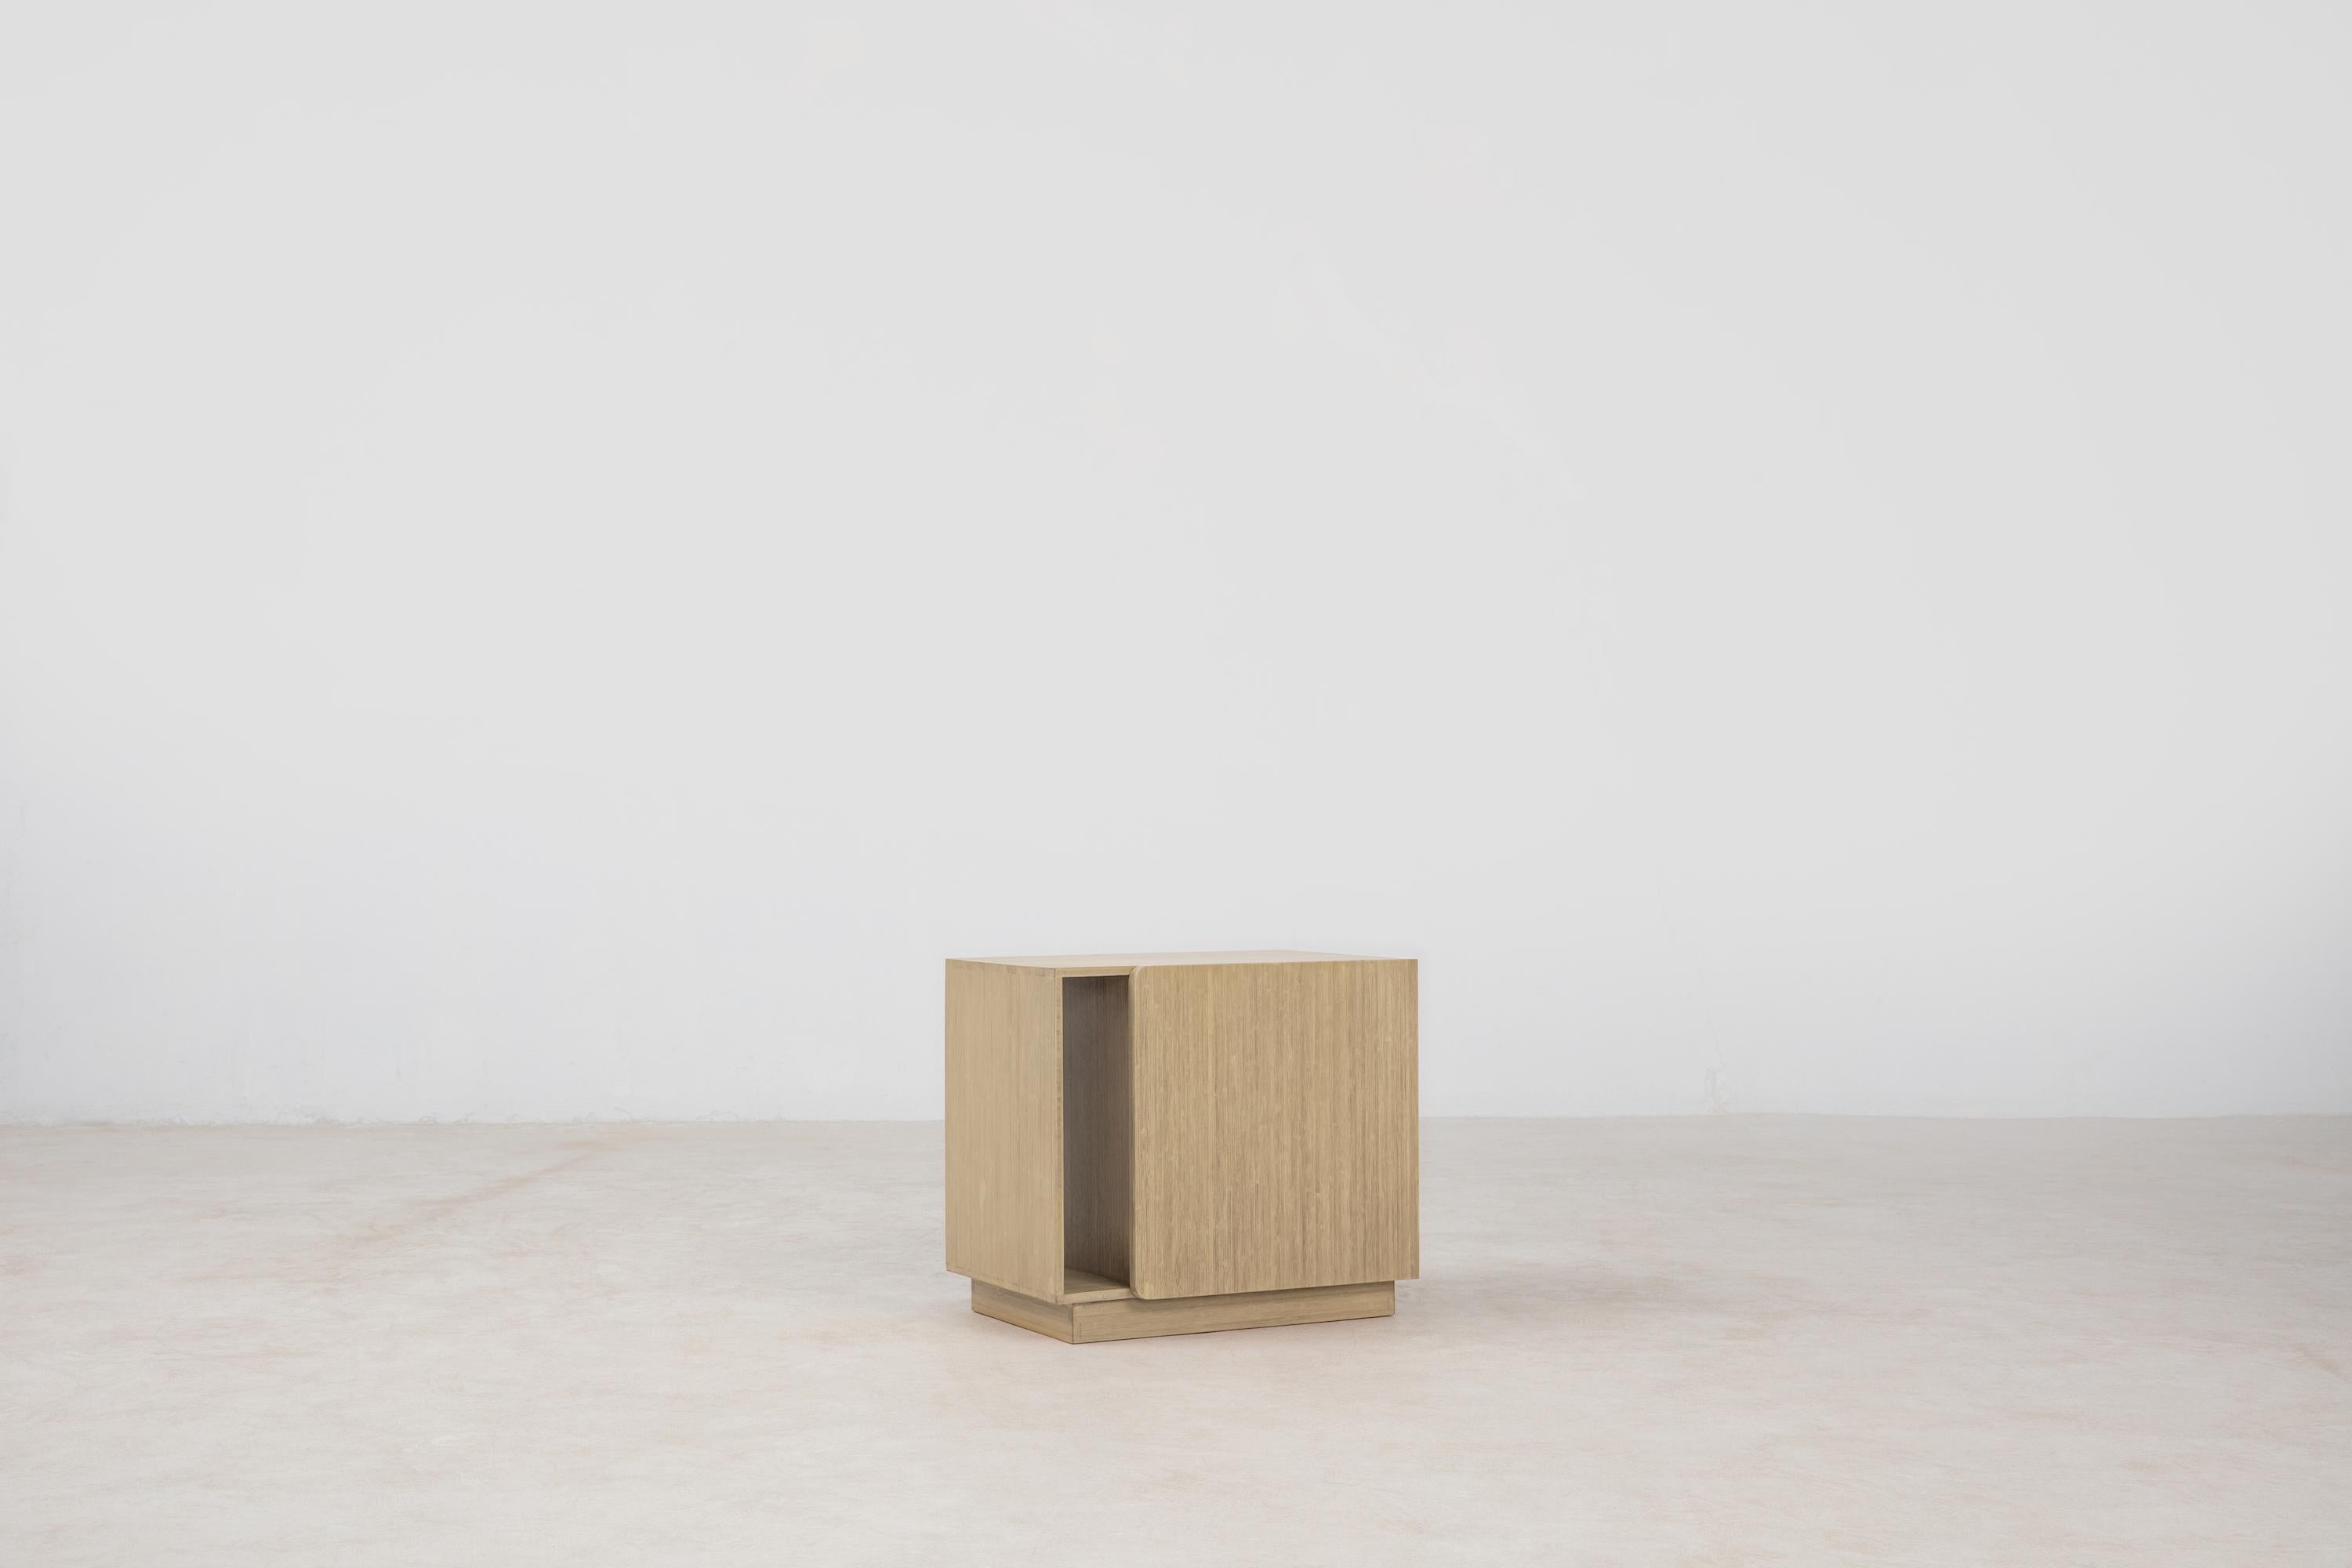 The Noura Nightstand is our nightstand designed for the Noura Bed. Like the bed, we’ve made the nightstand using solid pressed moso bamboo, in line with our commitment to pushing more sustainable materials. The moso bamboo is pressed into a dense